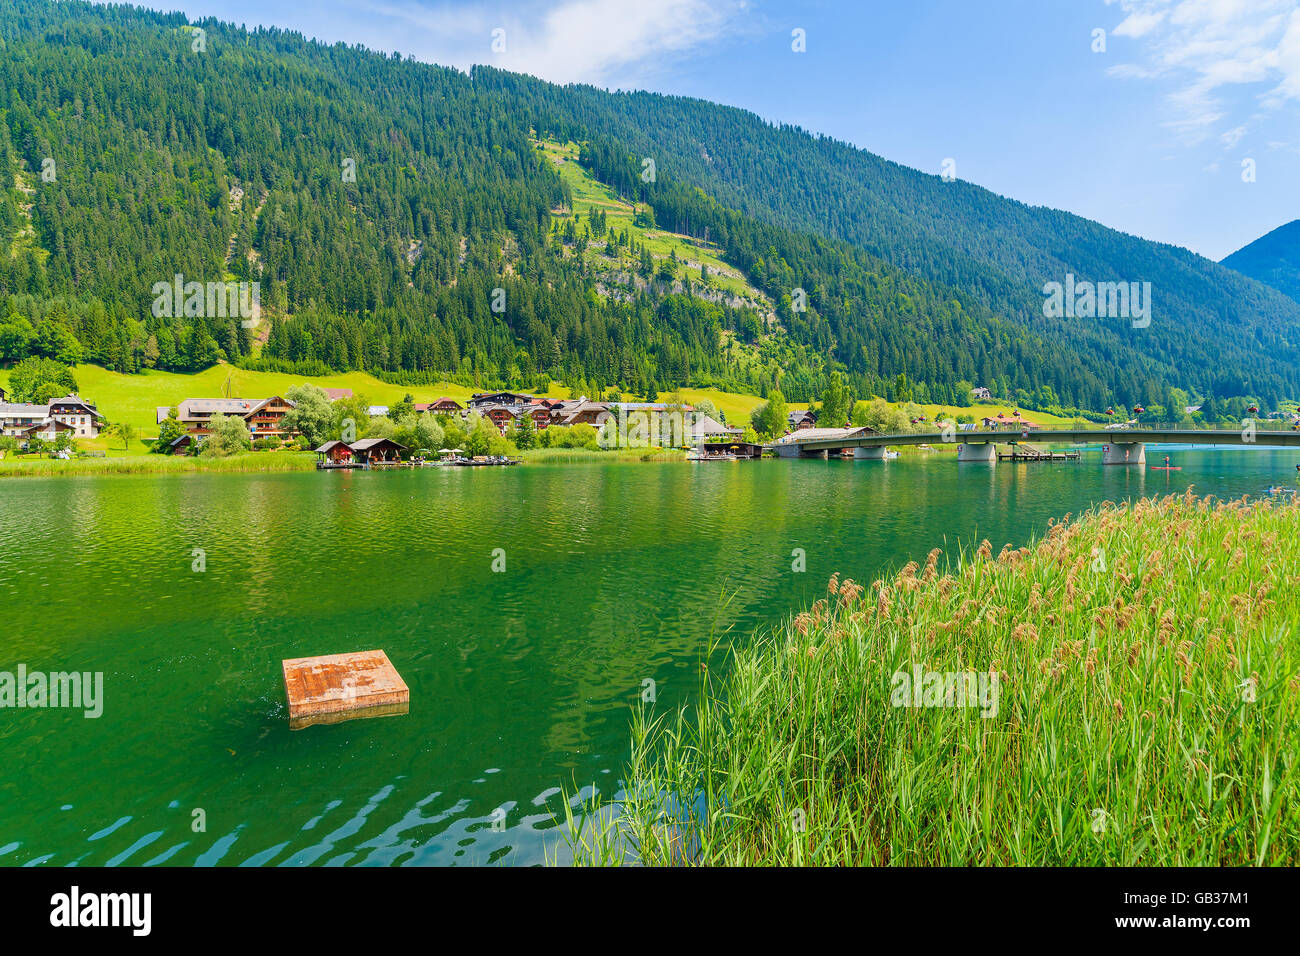 Wooden platform for swimming on green water Weissensee lake in summer landscape of Alps mountains, Austria Stock Photo